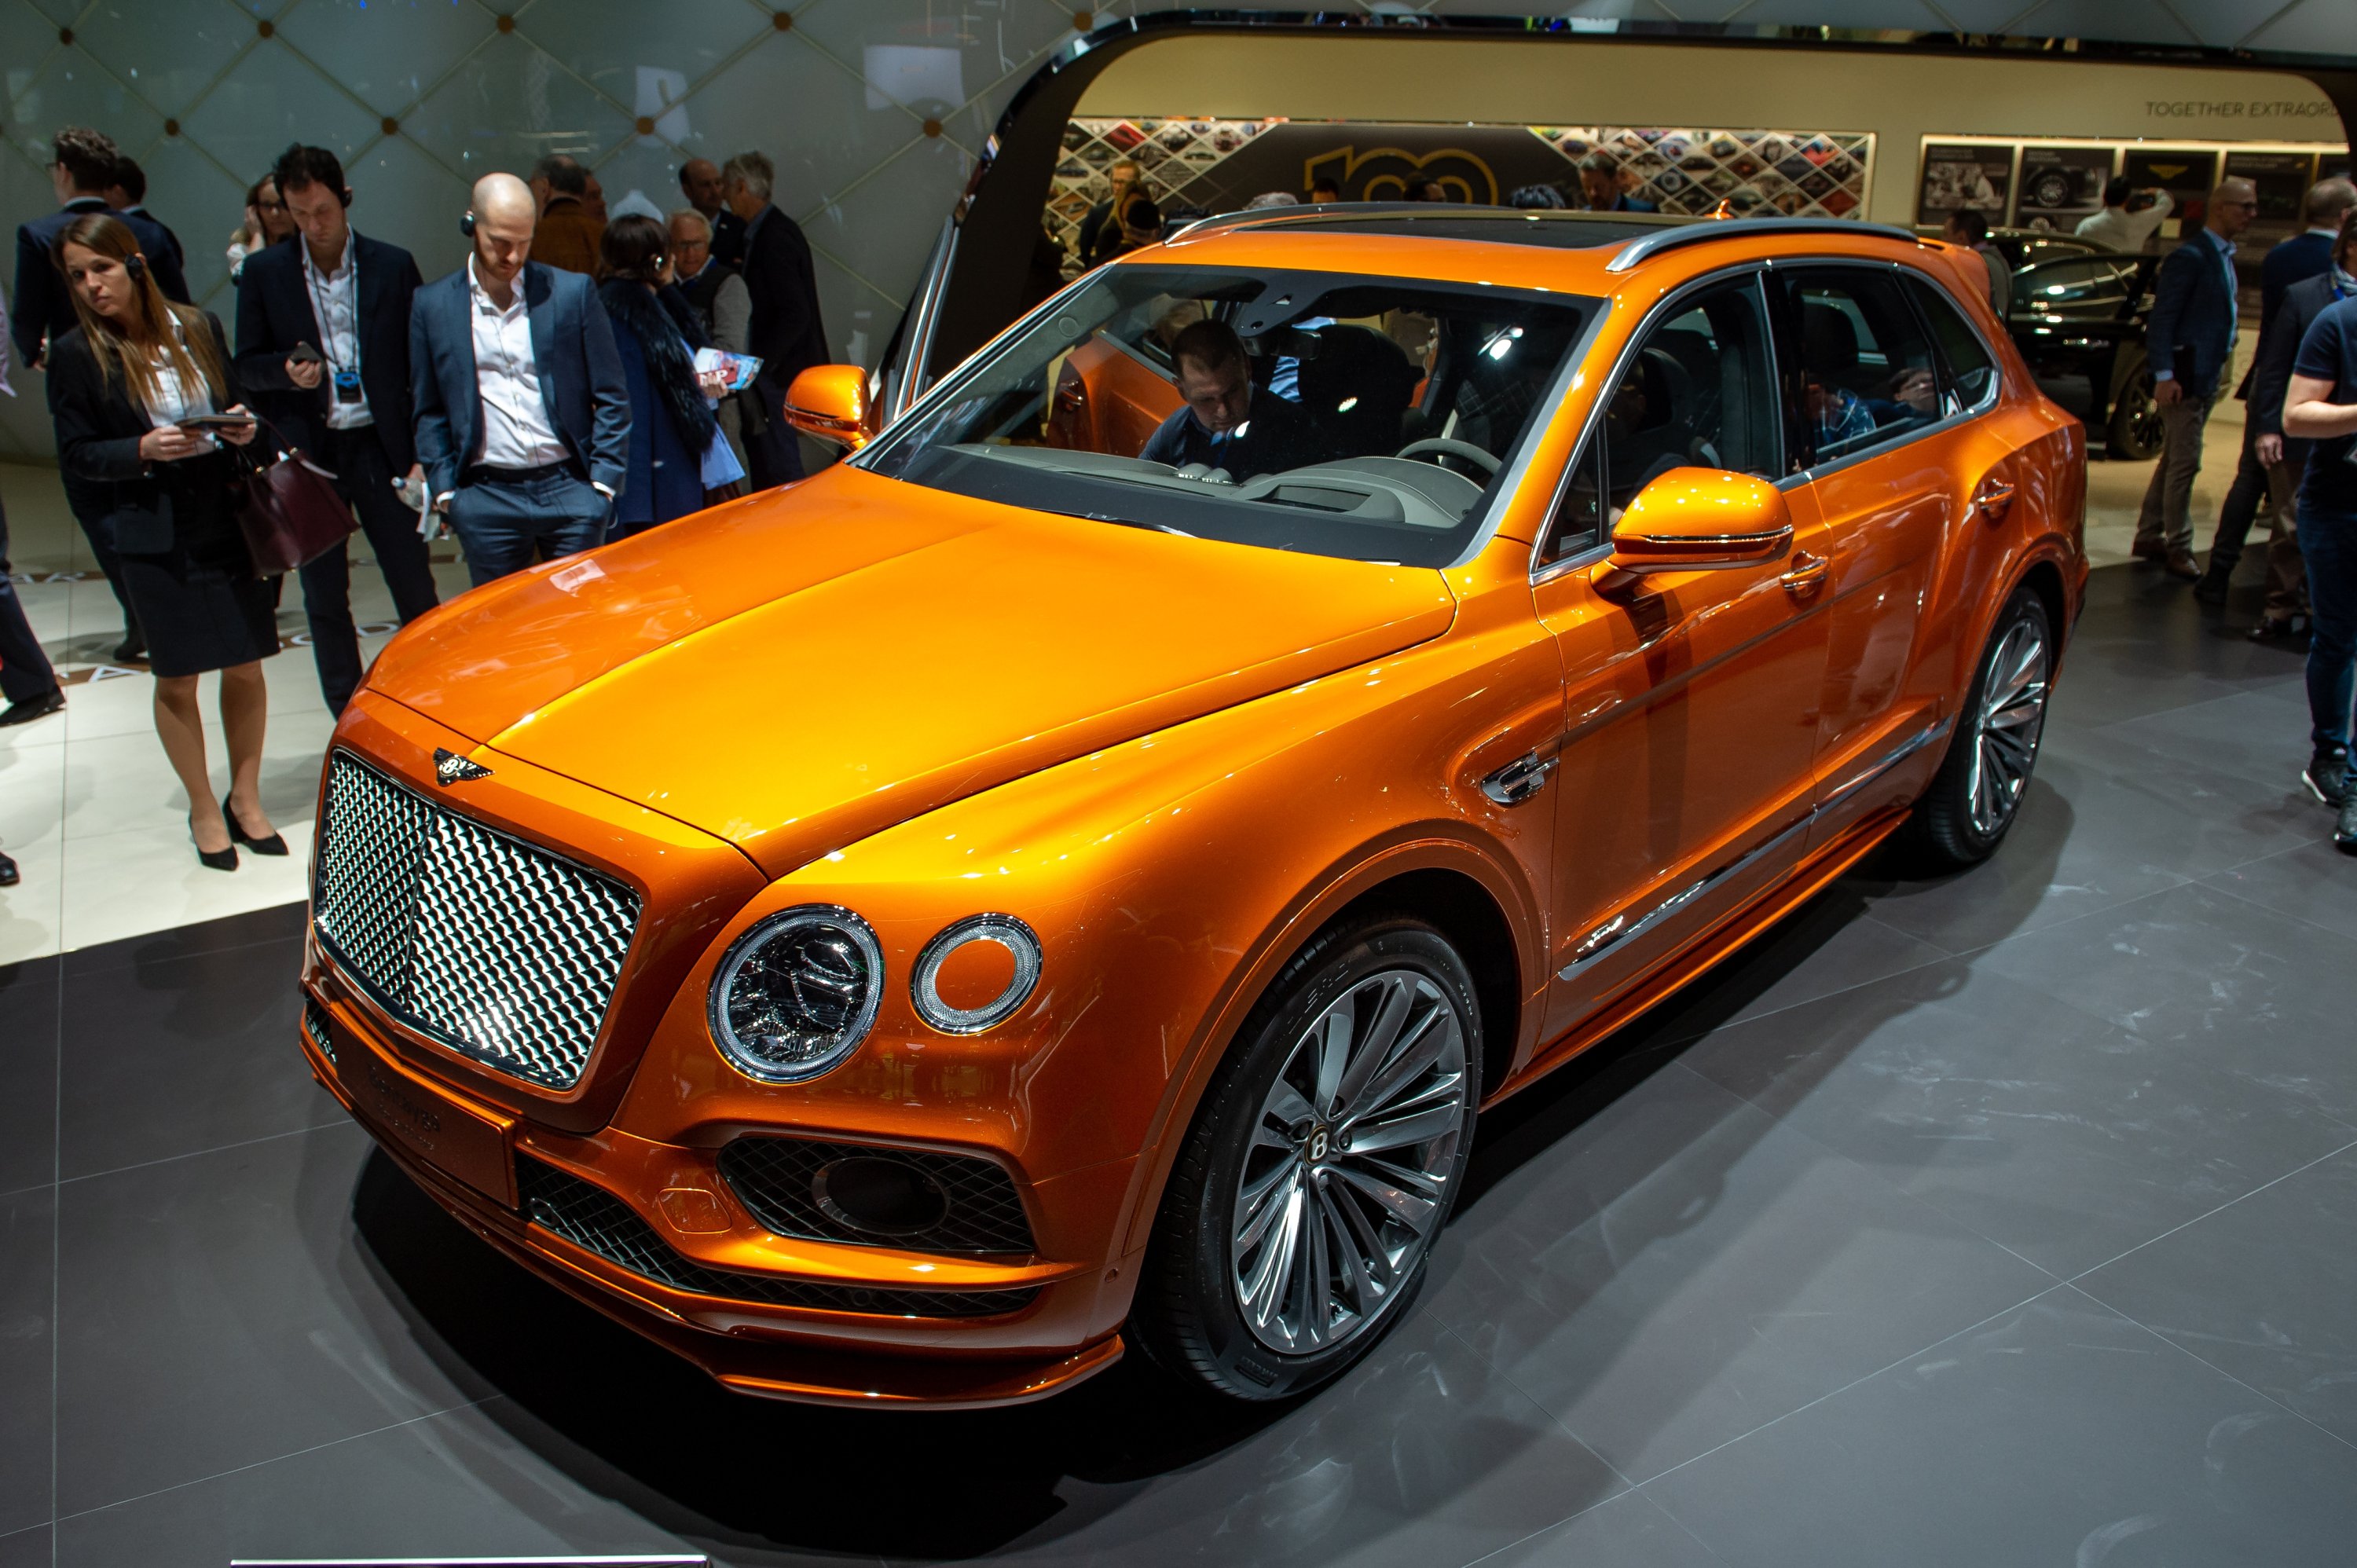 Guests check out the Bentley Bentayga at the second press day of the 89th Geneva International Motor Show, in Geneva, Switzerland, March 6, 2019. (Getty Images)